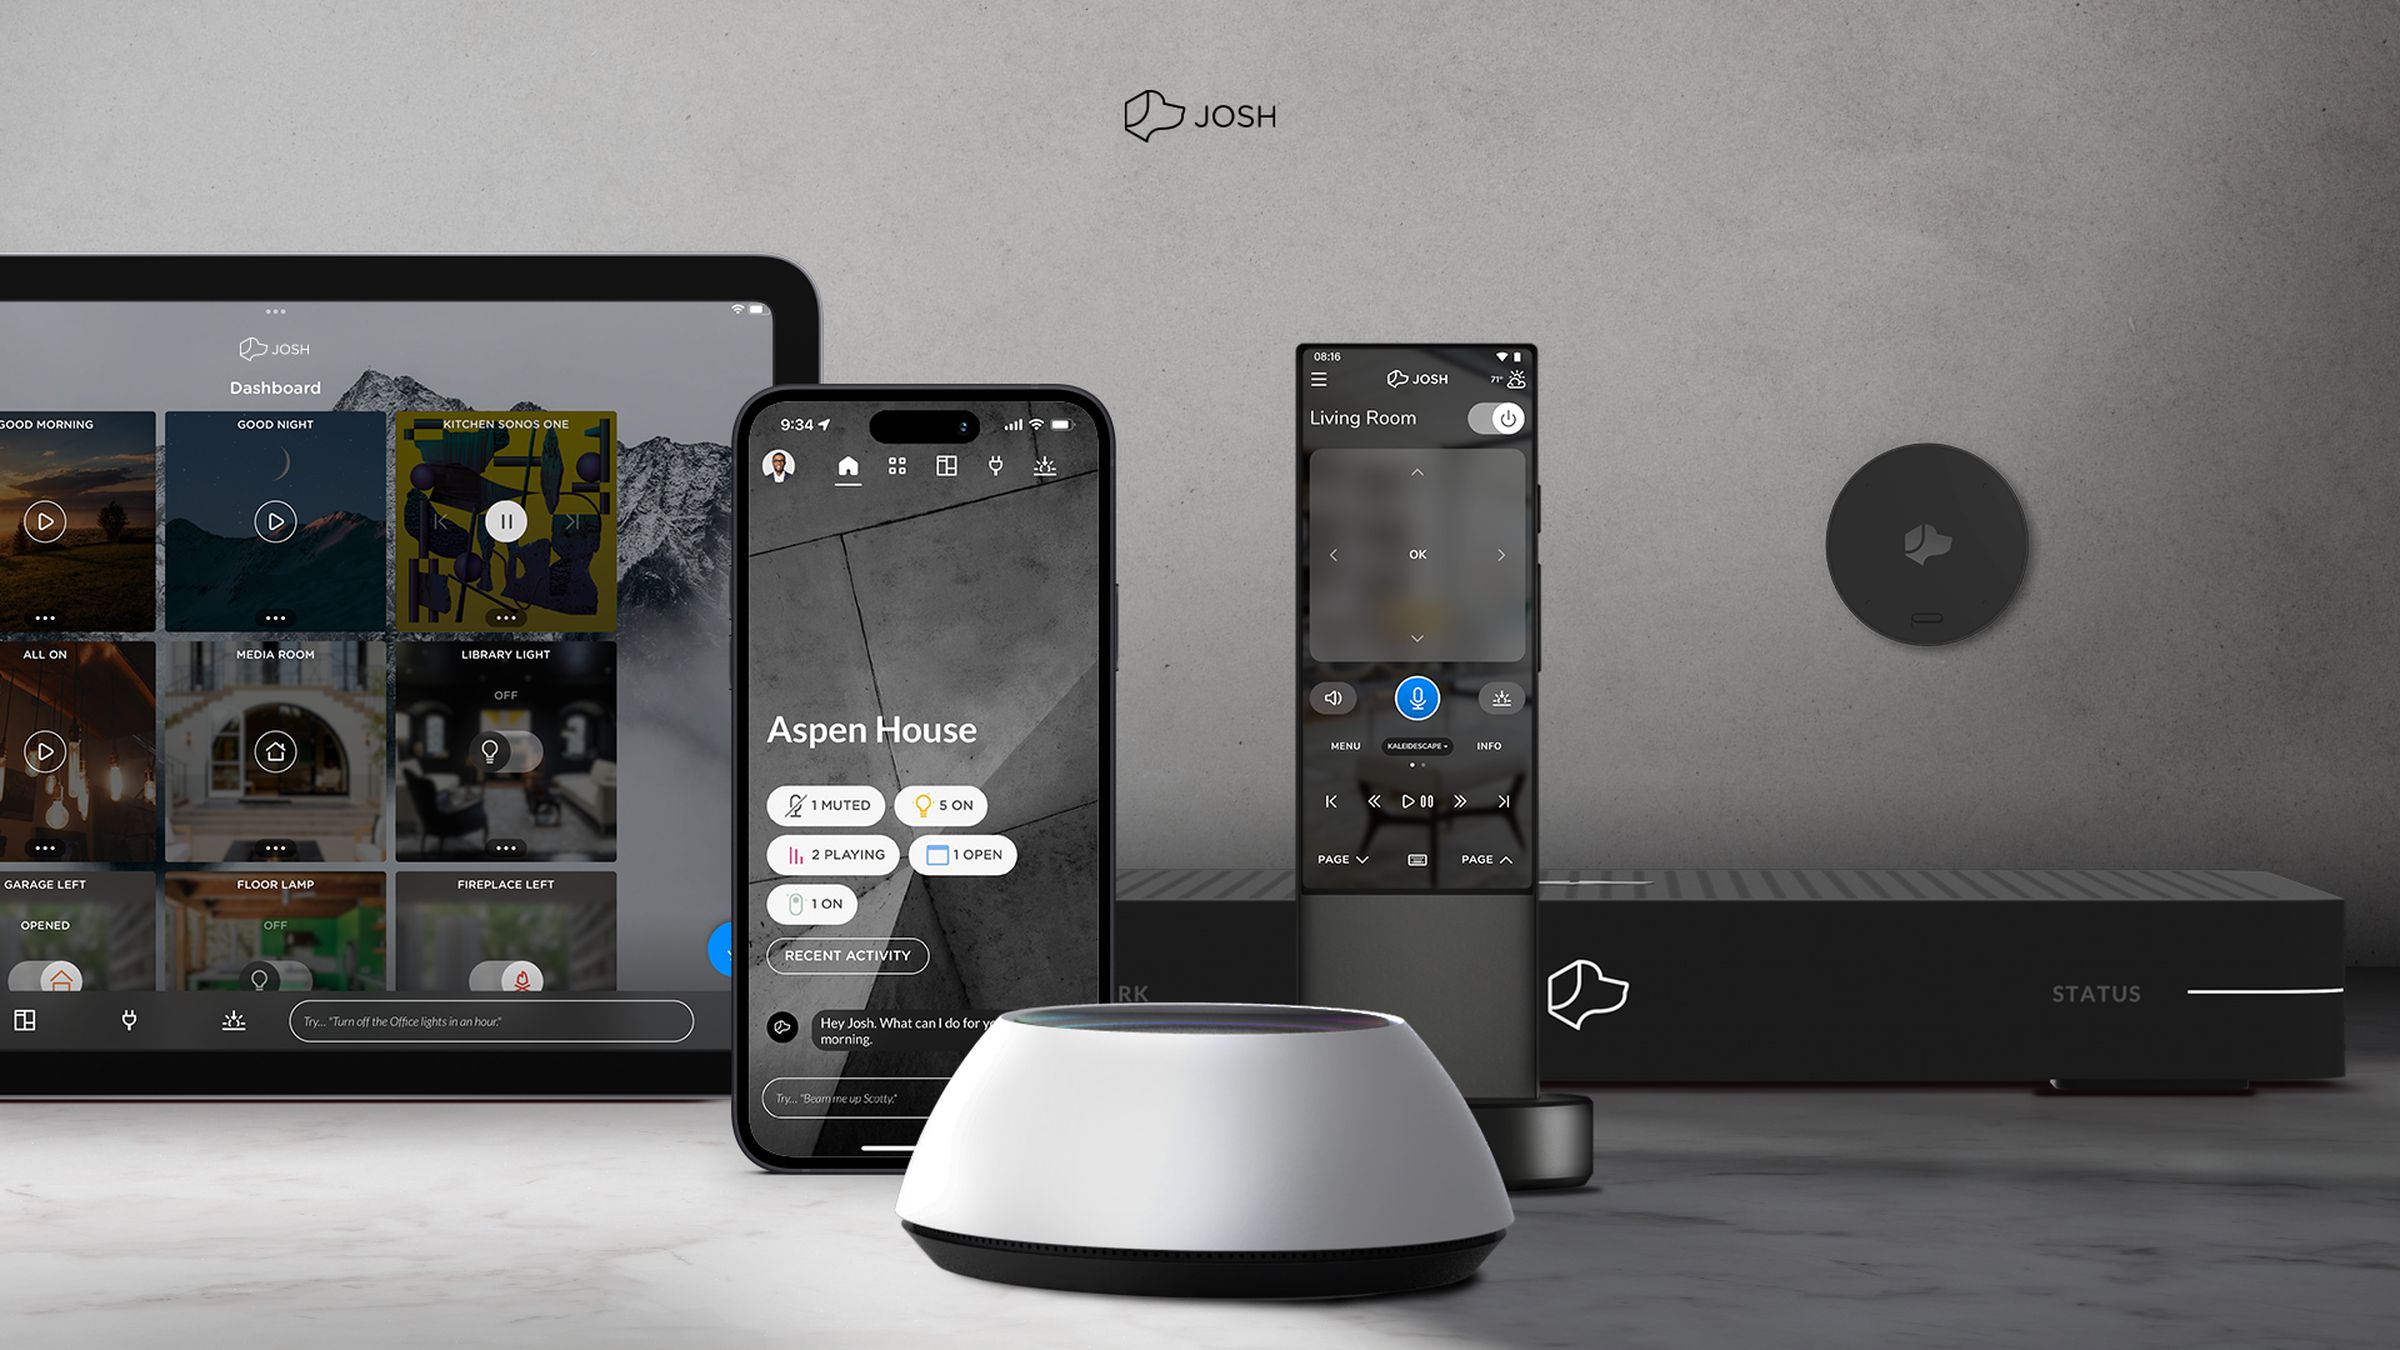 The Josh.ai system comprises of a hub and two models of smart speakers as well as an app and integration with the Ava smart remote.